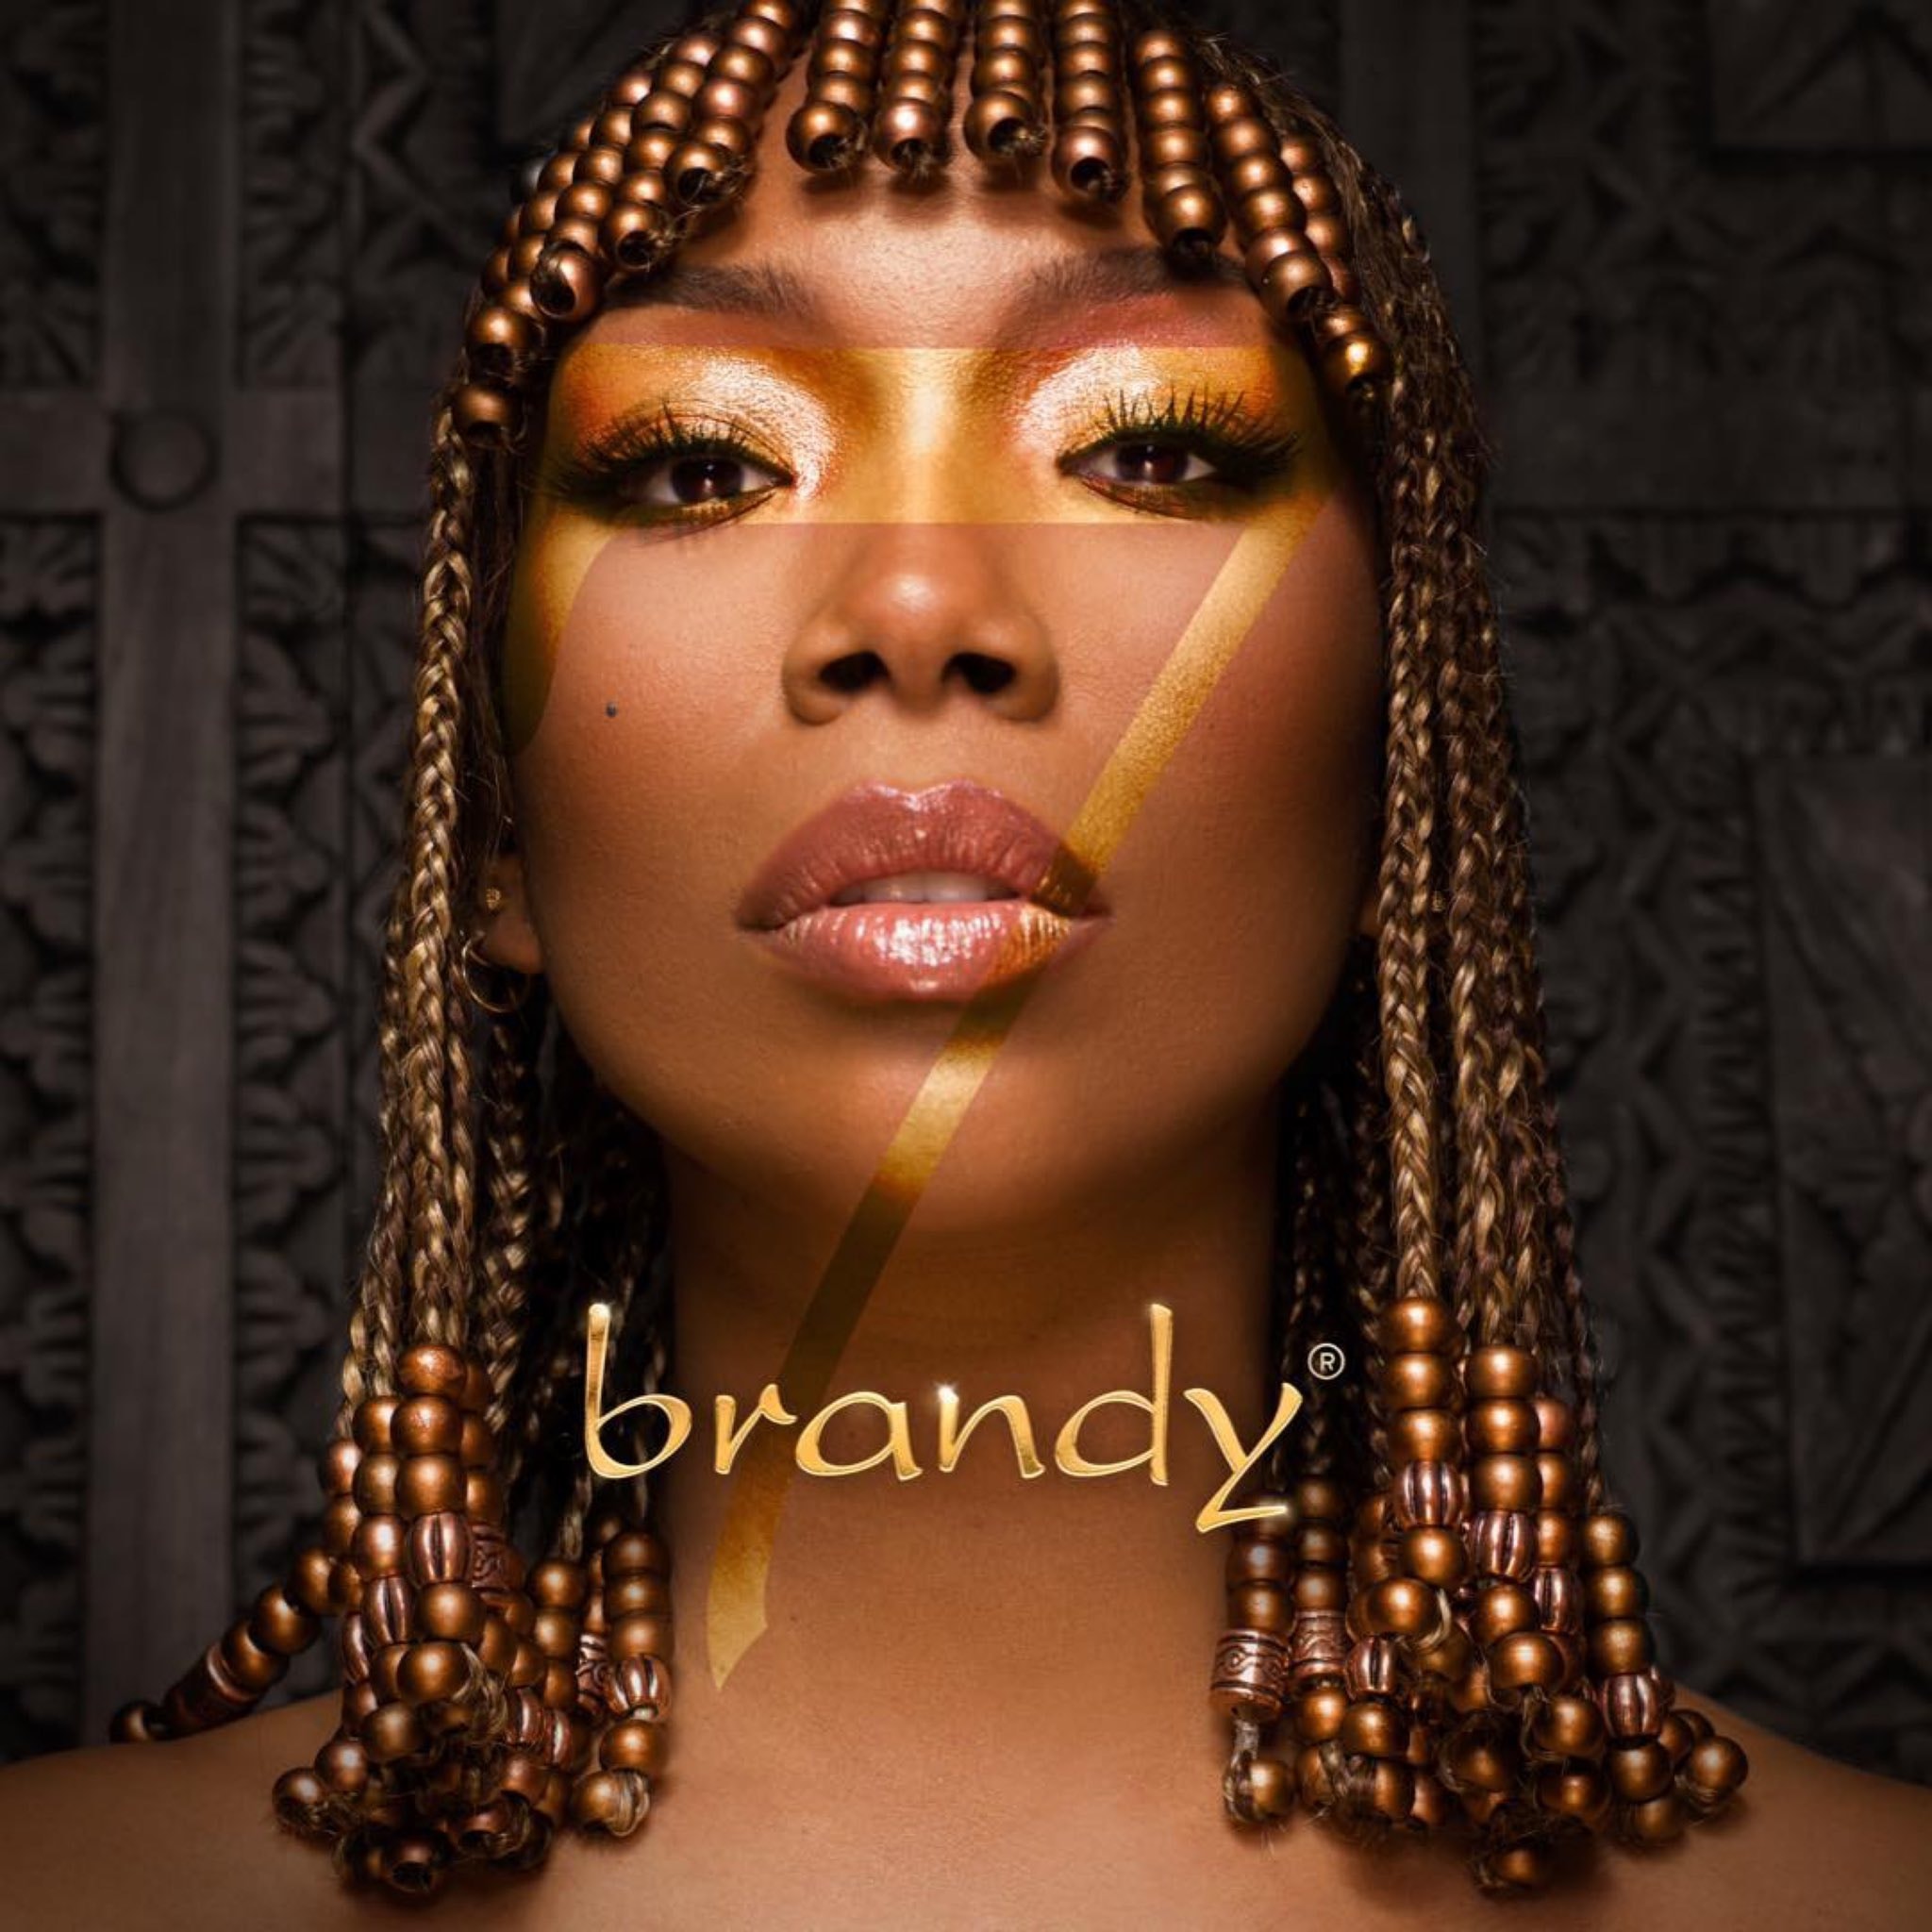 New Music: Brandy - Rather Be (Produced by DJ Camper)